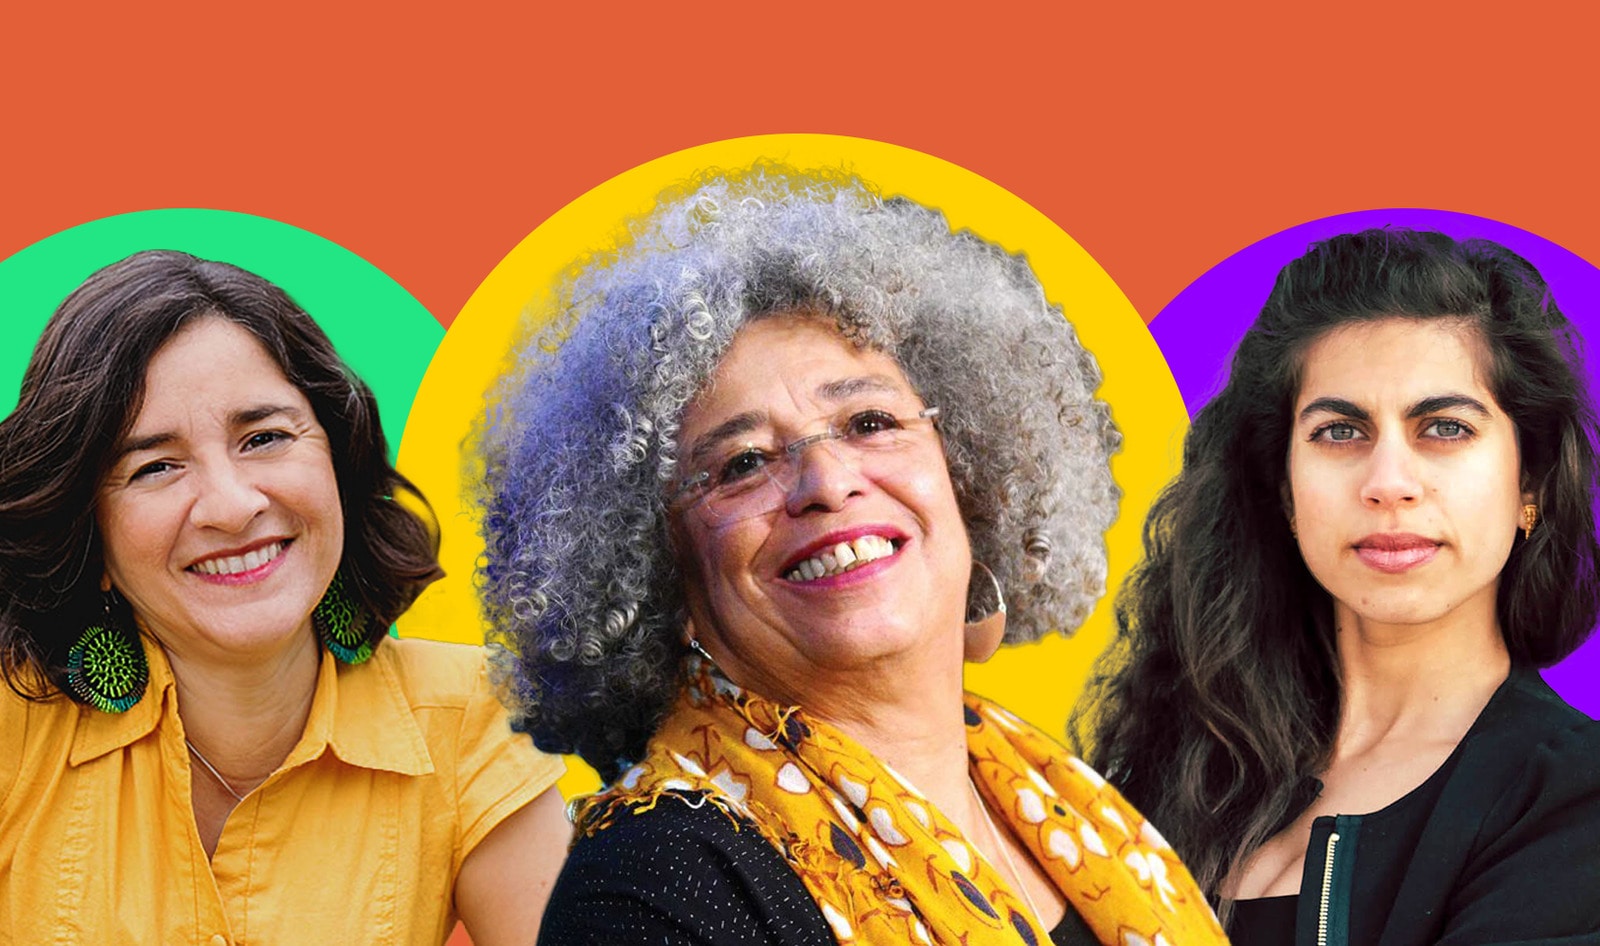 15 Vegan Women Activists of Color You Need to Know About